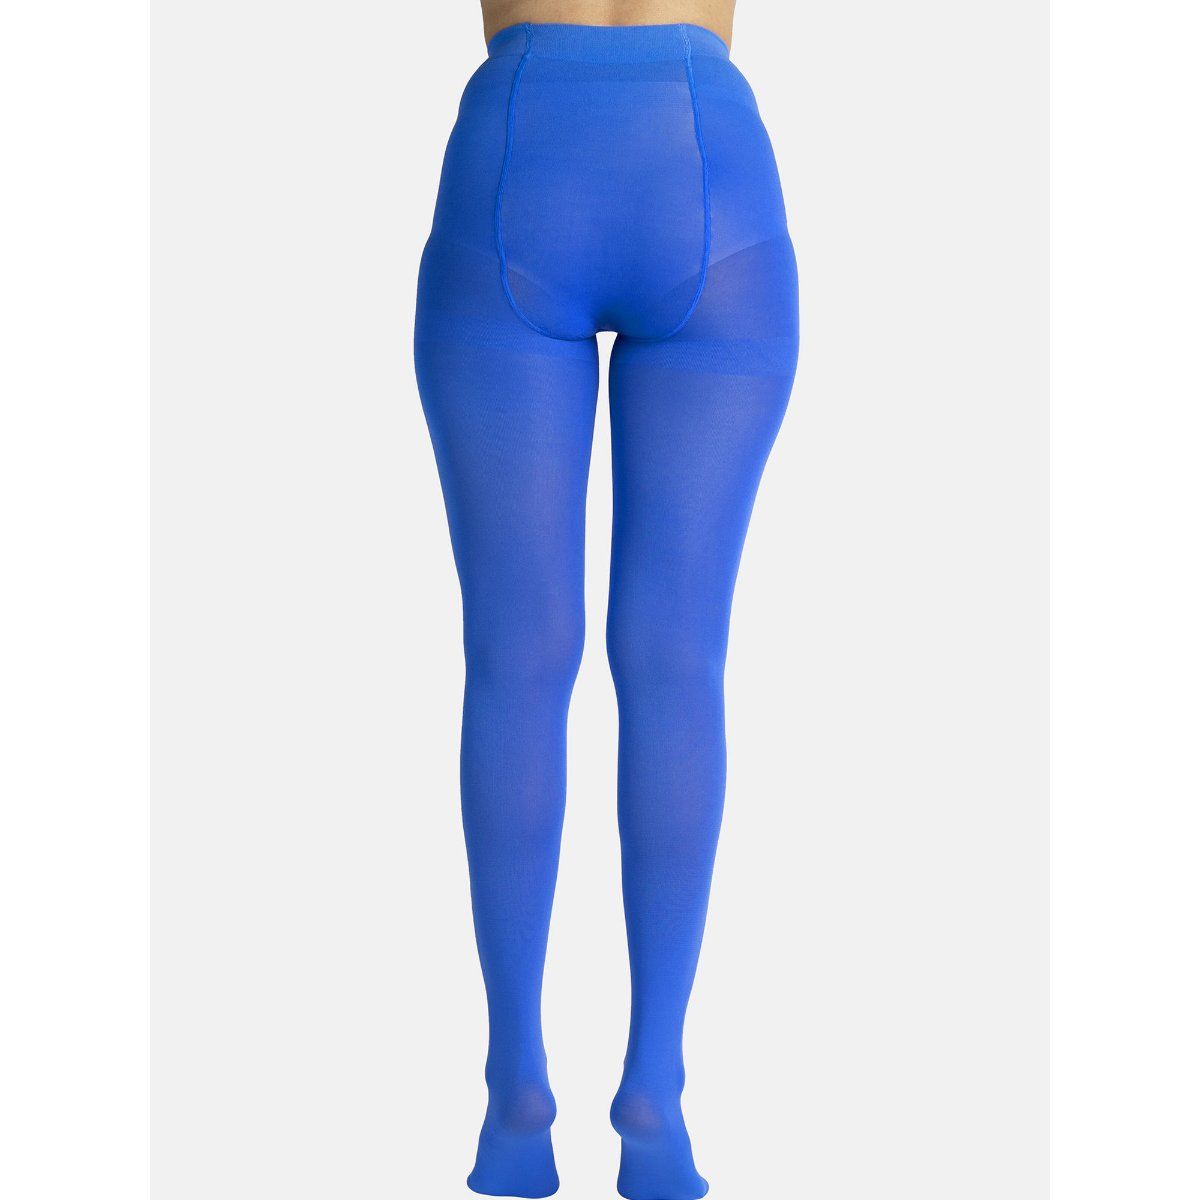 Theater Electrique Bleue Stockings Blue Buy Theater Electrique Bleue Stockings Blue Online